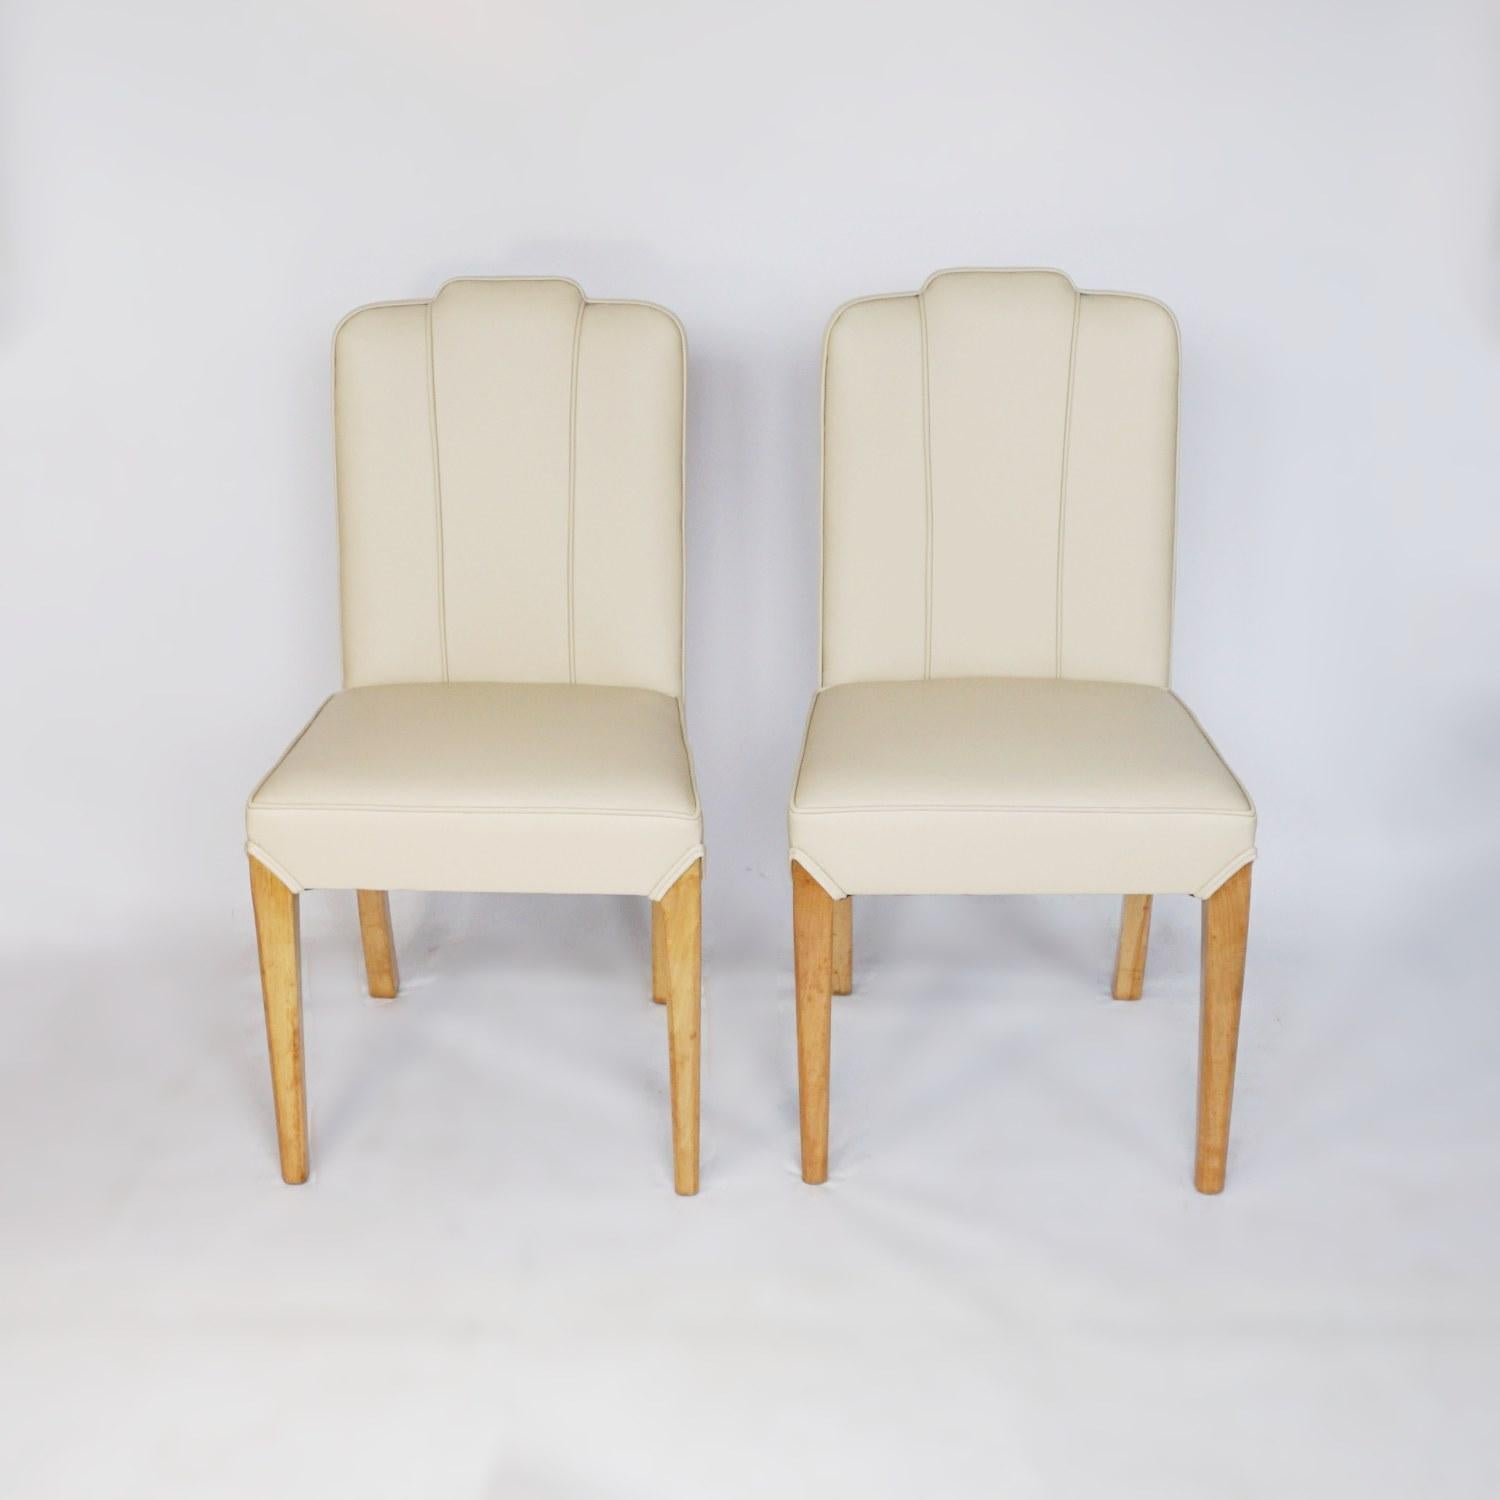 A pair of Art Deco side chairs. Burr walnut veneered backs, re-upholstered in cream leather. 

Dimensions: H 96cm, W 43cm, D 44cm, seat H 48cm, D 41cm

Origin: English

Date: circa 1930

Item number: 902216

All of our furniture is